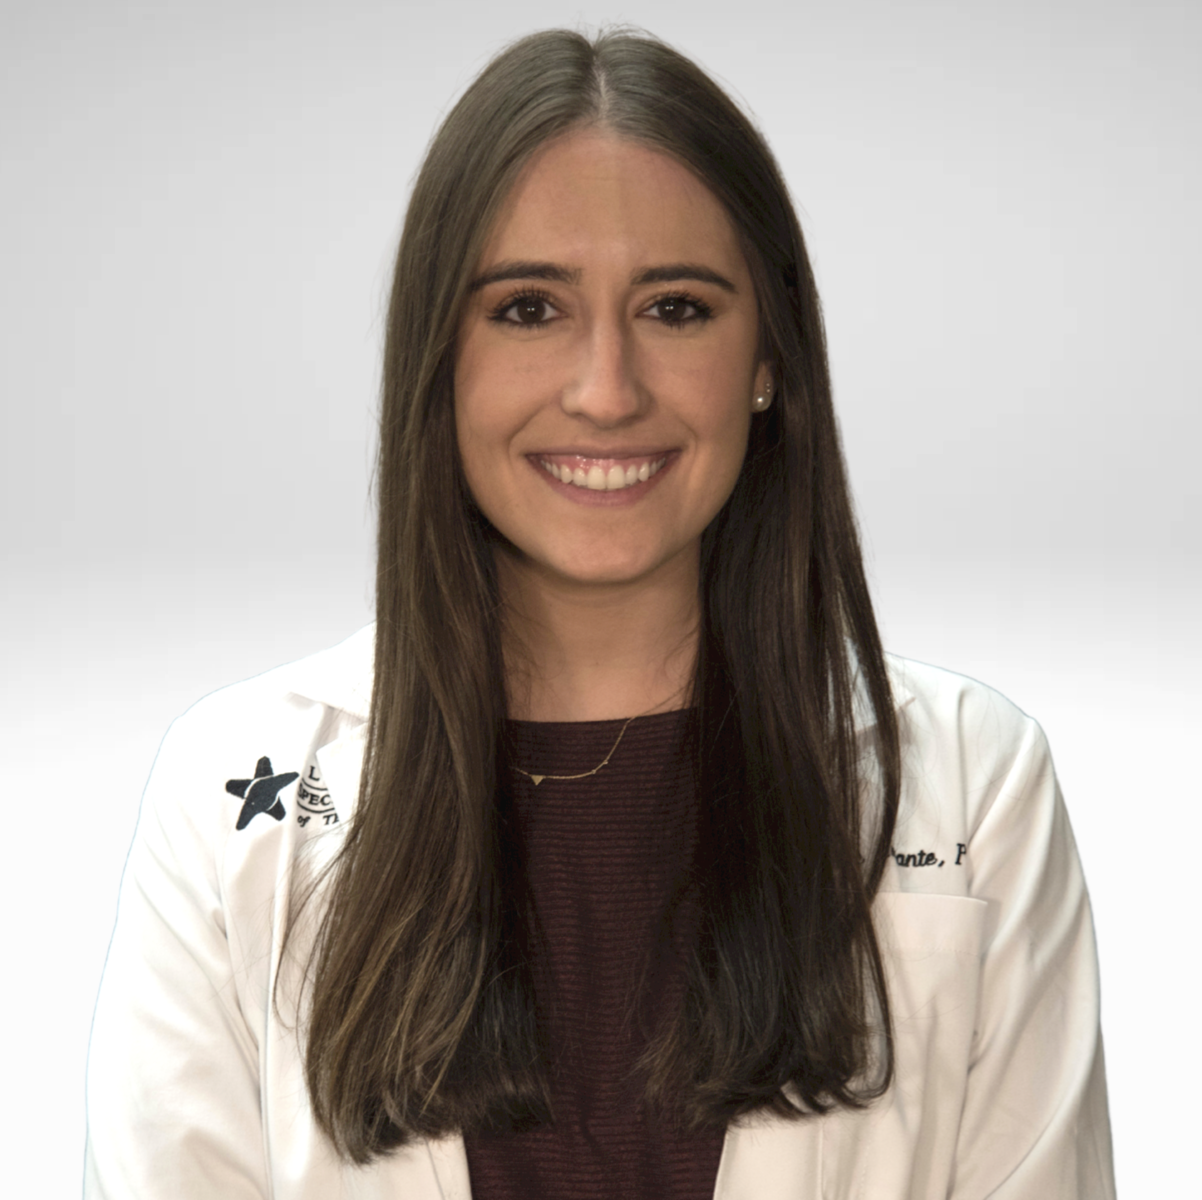 Contact Natalie Amante, Physician Assistant